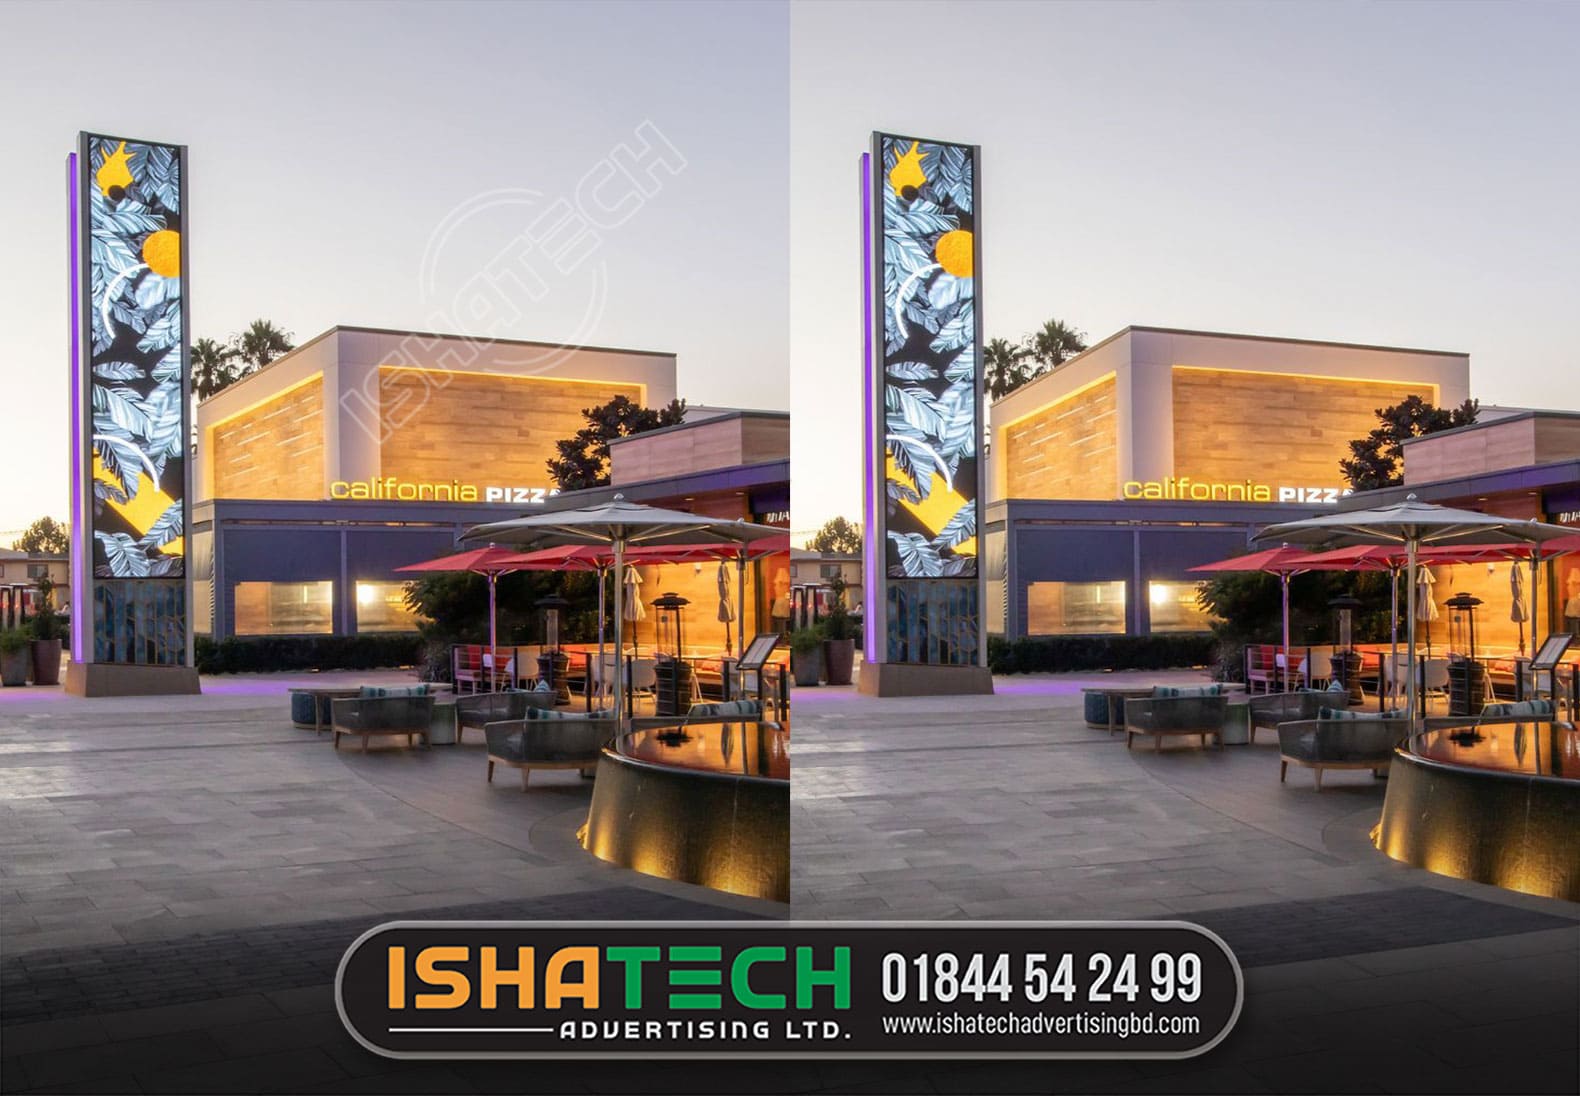 SHOPPING MALL LED OUTDOOR BRANDING BD, BEST LED SIGNBOARD MAKING COMPANY BD, LED ADS BD